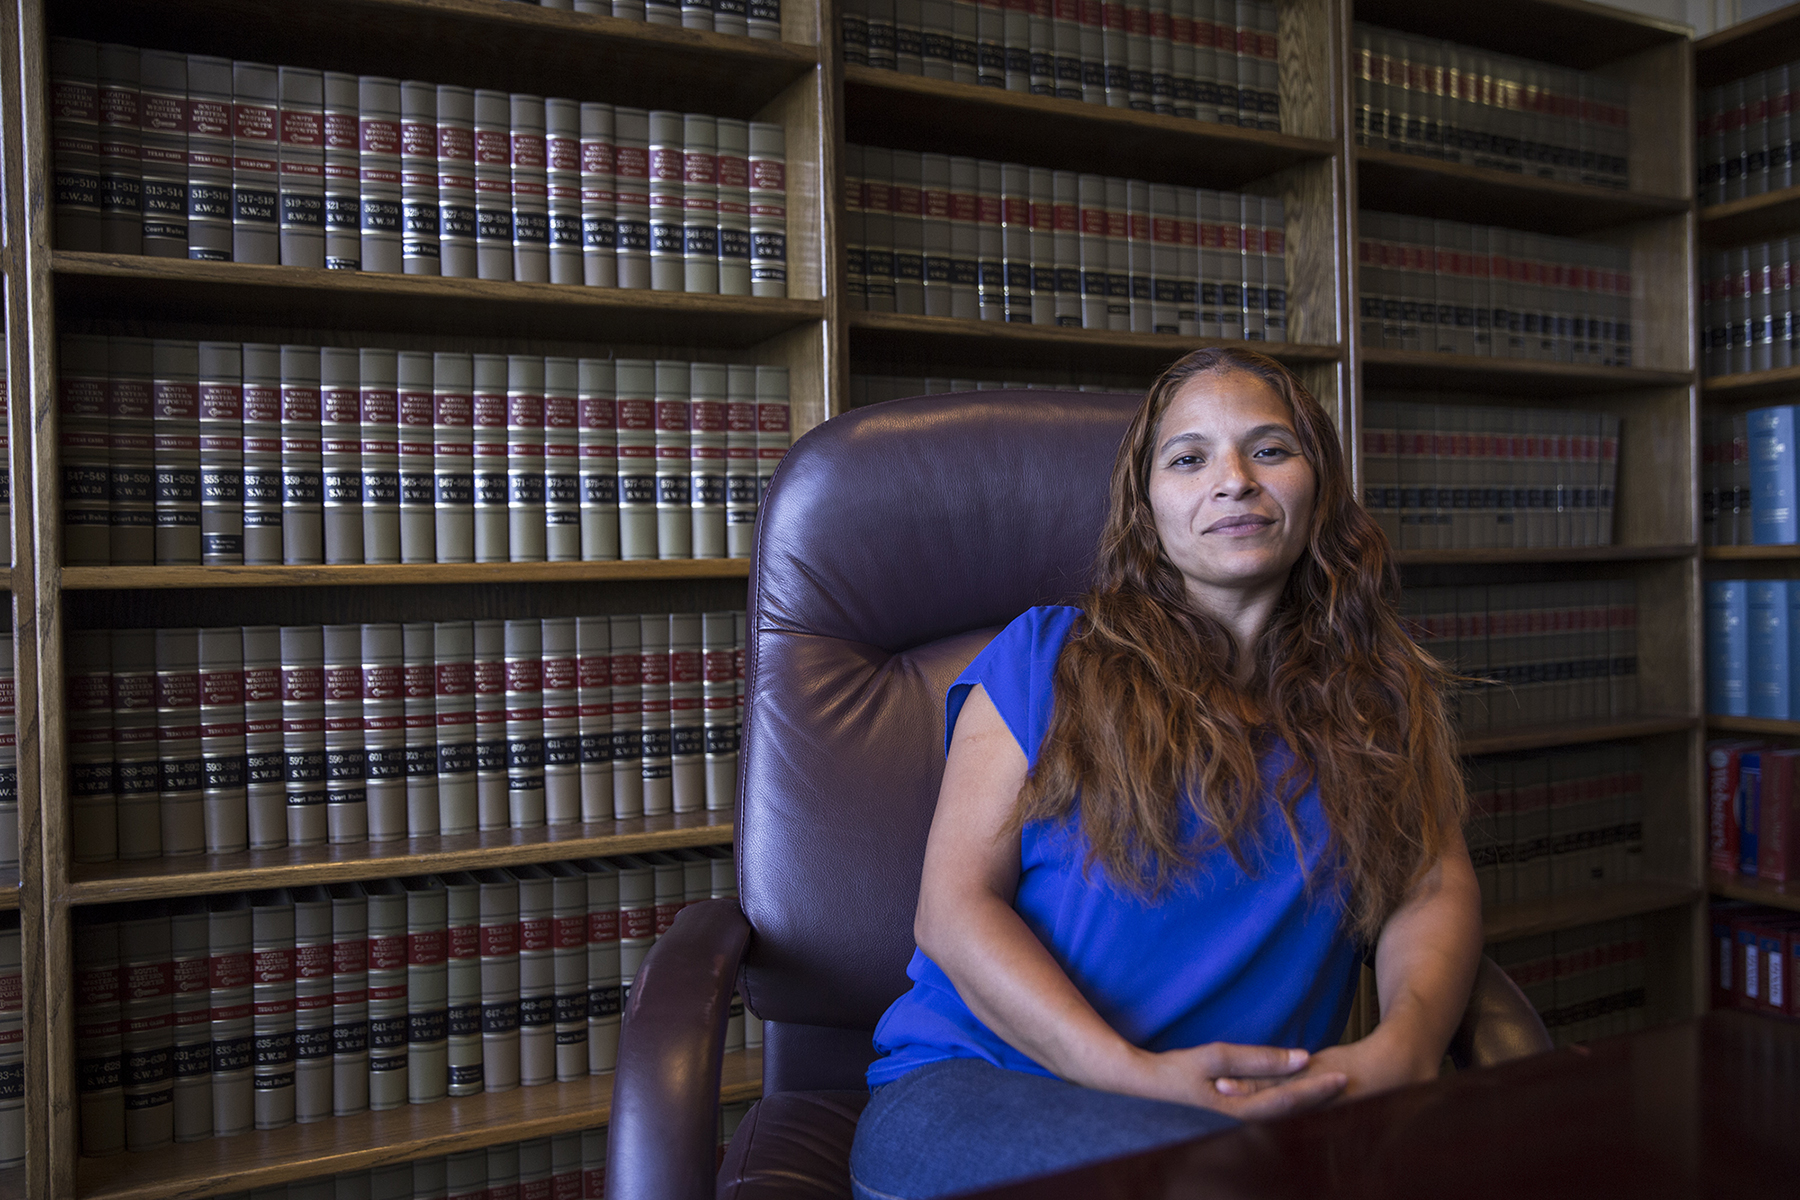 Rosa Maria Ortega sits inside her Dallas attorney’s office. Ortega, a U.S. resident but not a citizen, was arrested on illegal voting charges after an investigation by the state’s attorney general and the Tarrant County district attorney’s office. According to her lawyer Domingo Garcia, Ortega discovered she wasn’t eligible to vote after she updated her voter registration to Tarrant County, despite having voted three times in Dallas County. (Pinar Istek/News21)